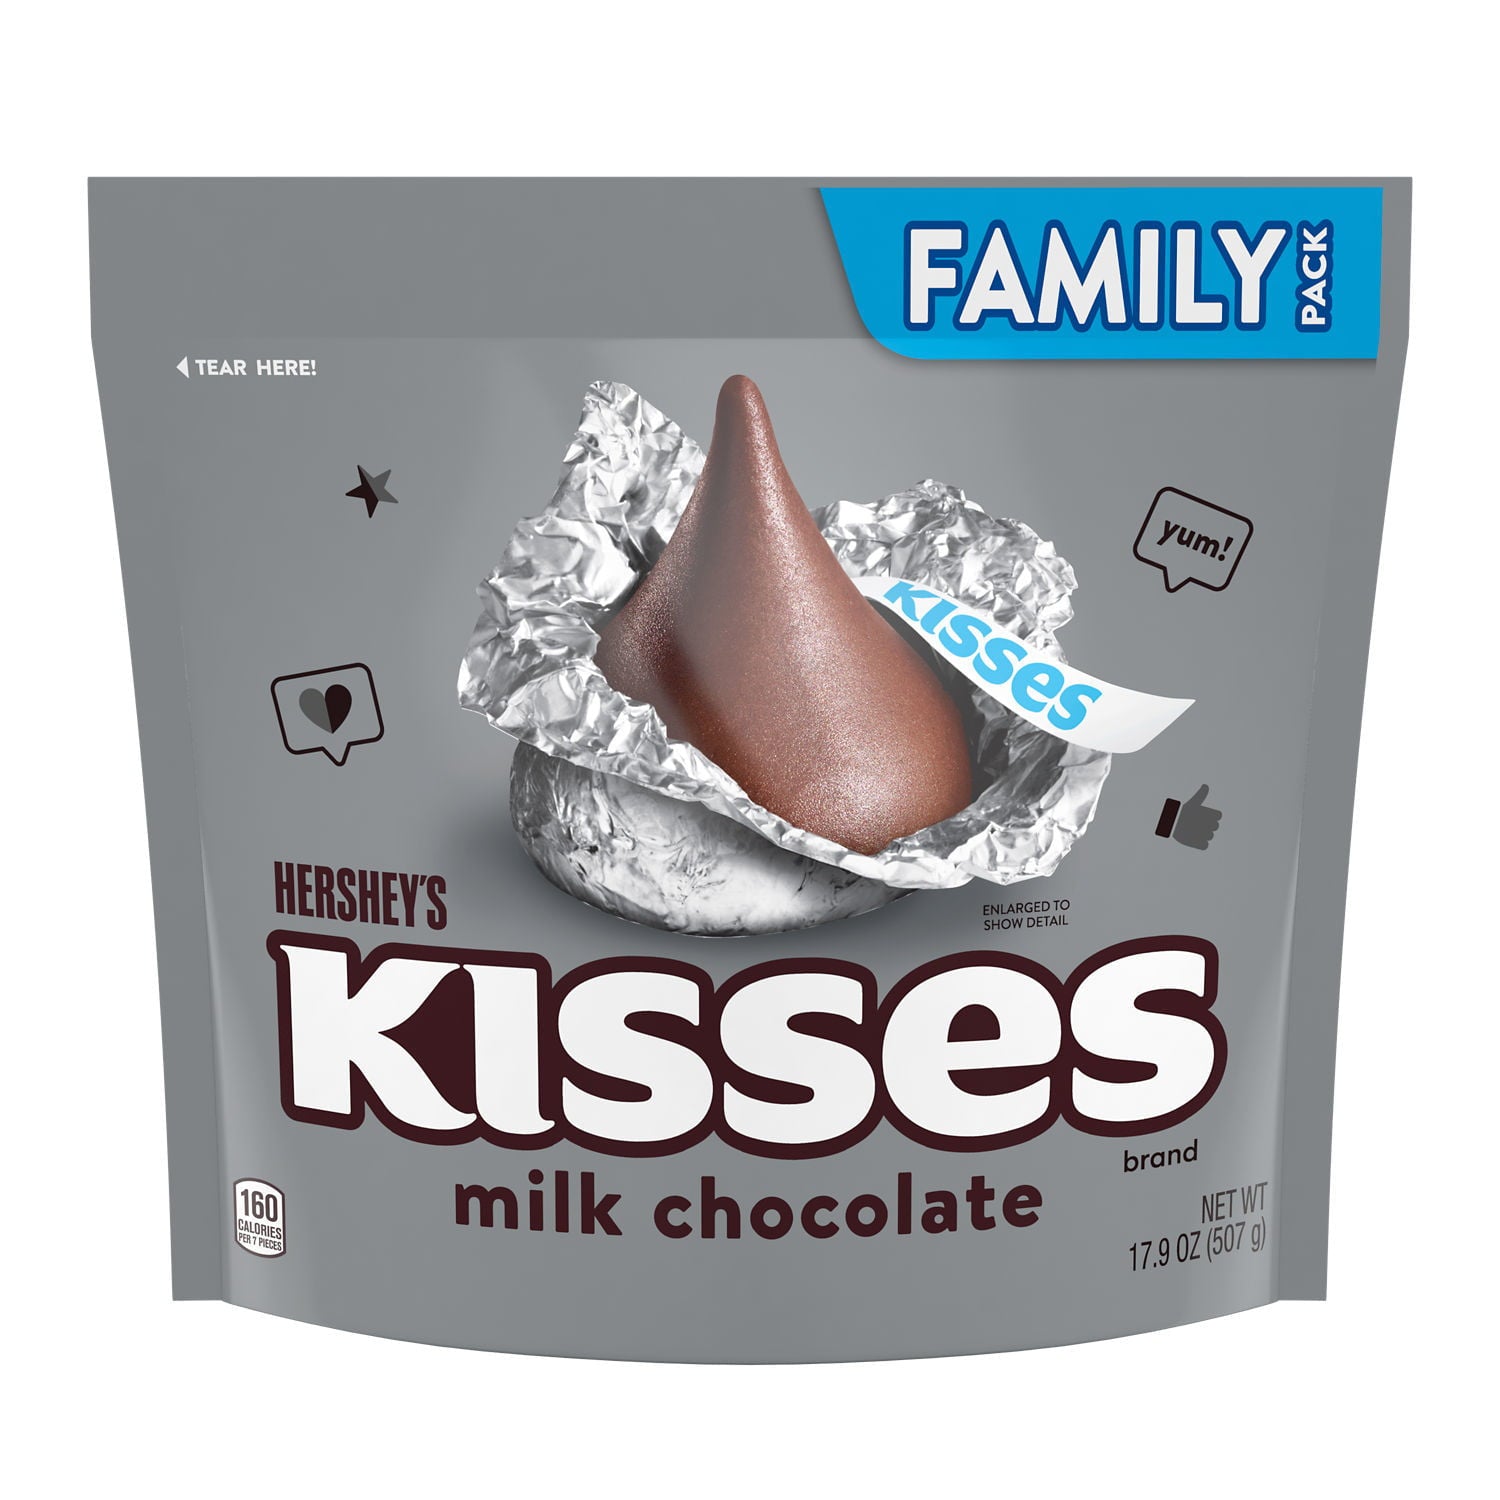 HERSHEY'S, KISSES Milk Chocolate Candy, Individually Wrapped, Gluten Free, 17.9 oz, Family Pack